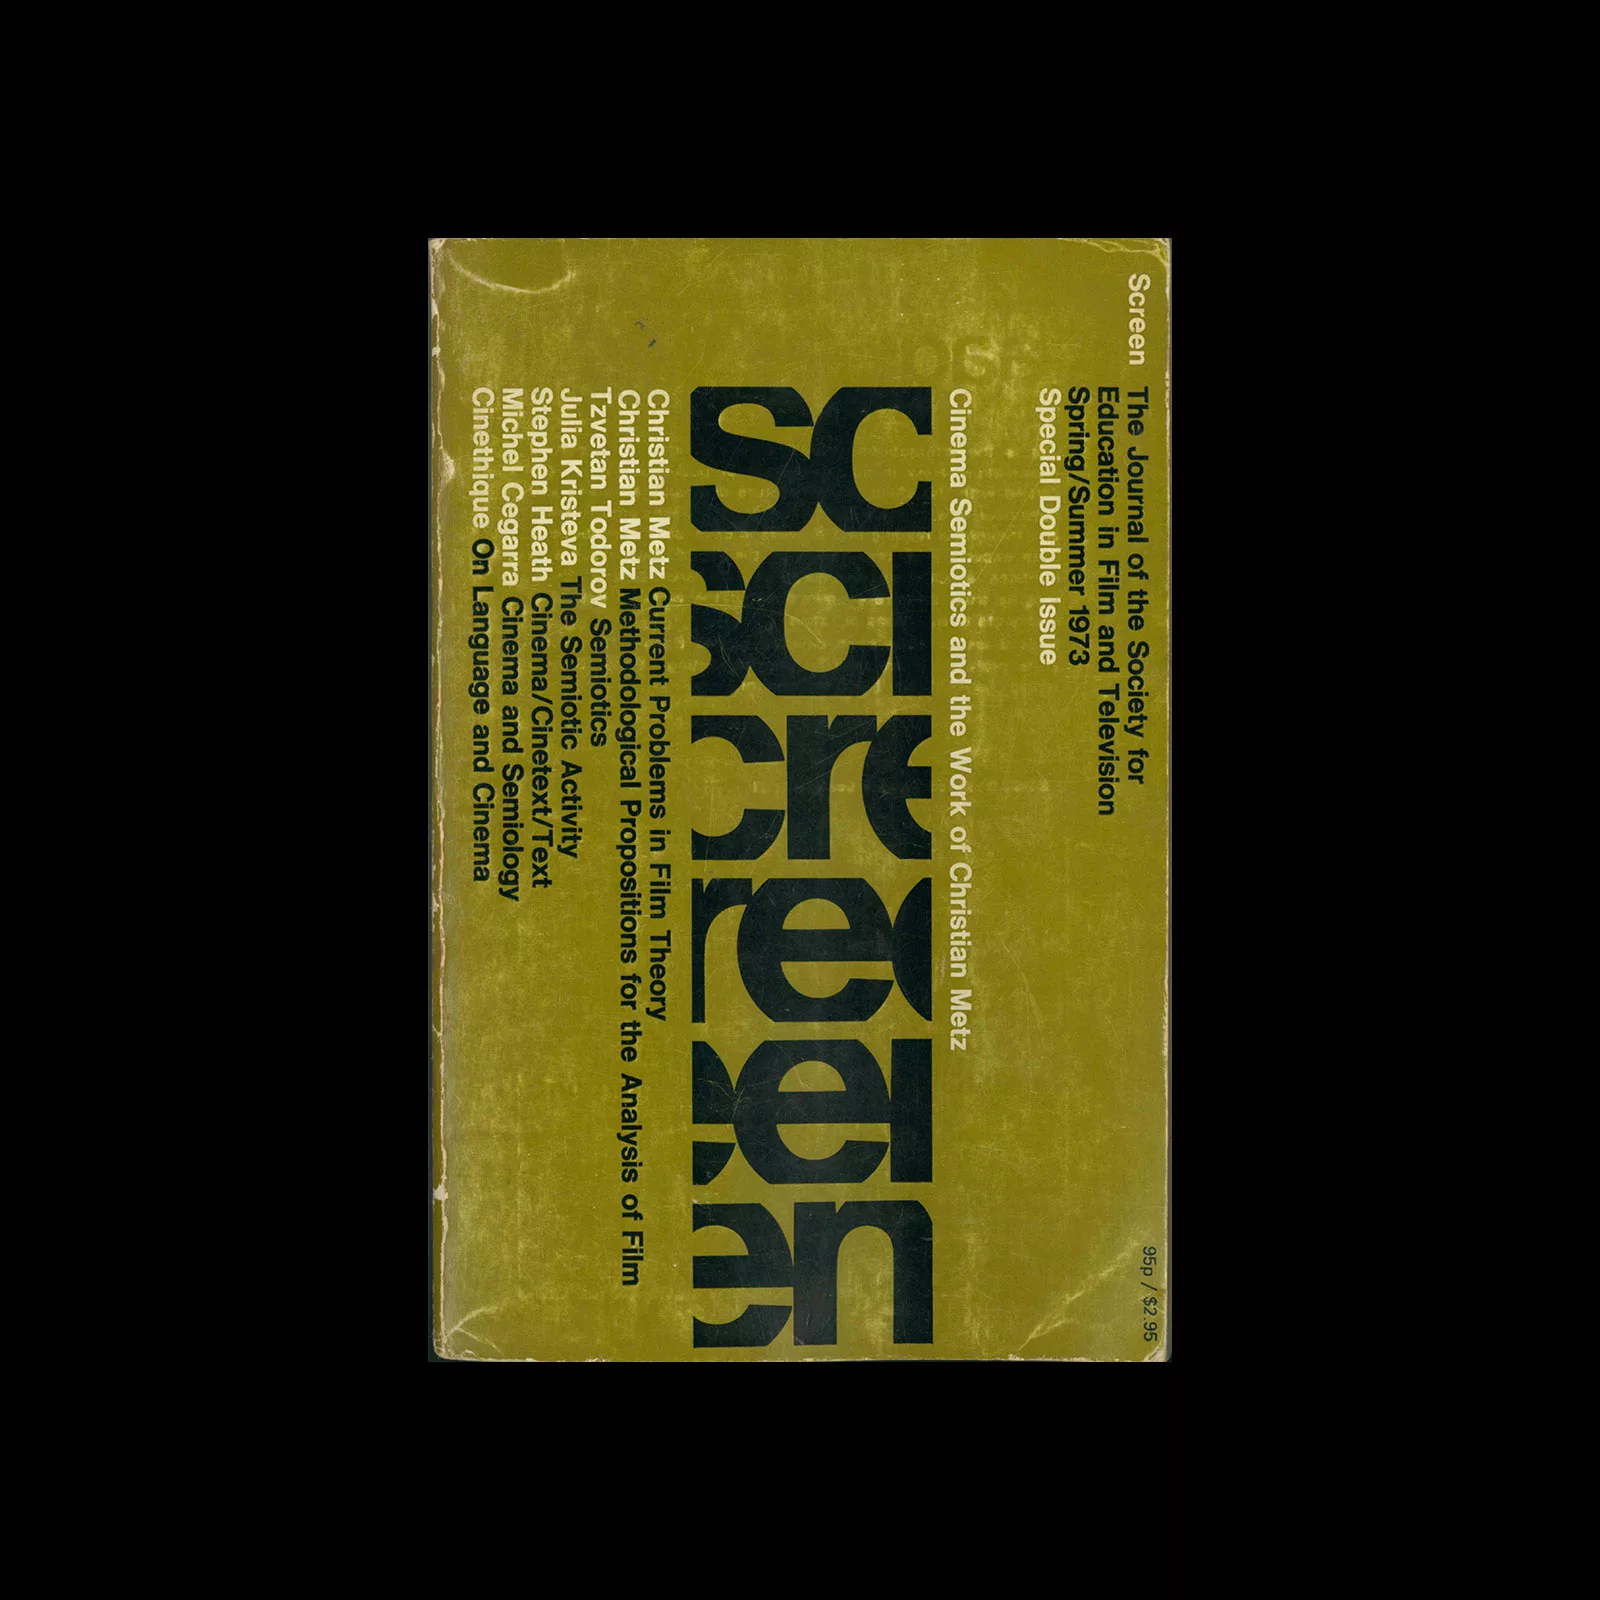 Screen, Journal of the Society for Education in Film and Television, Spring/Summer 1973. Books design by Gerald Cinamon